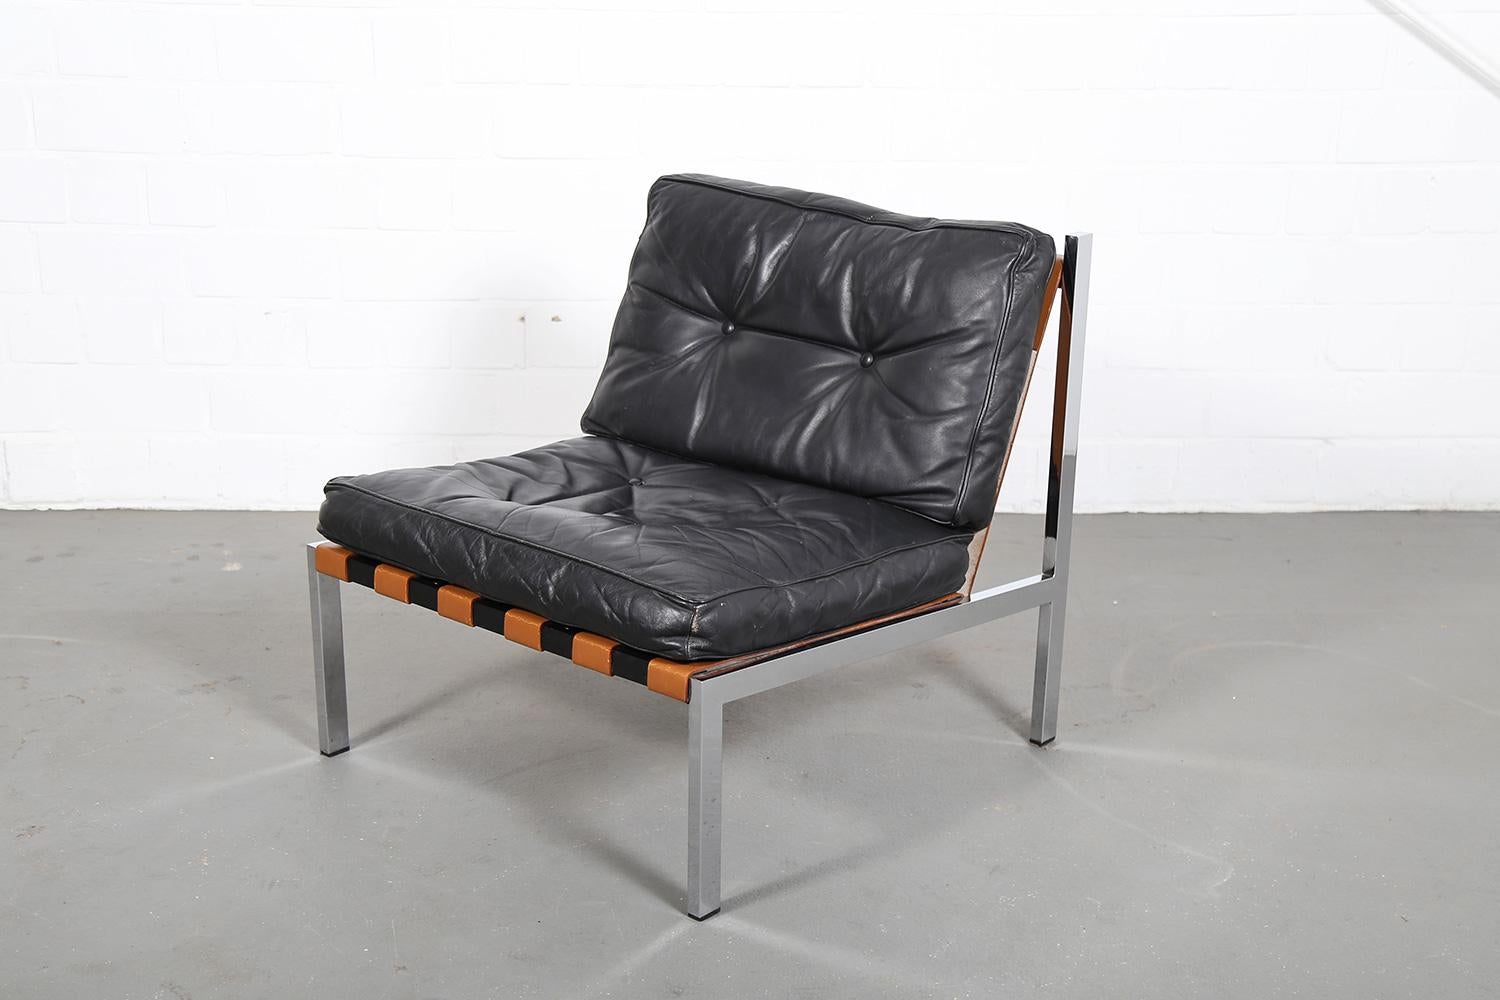 Barcelona armchair designed by Prof. Ernst Josef Althoff in the 1960s. Ernst Josef Althoff was friends with Mies van der Rohe and his design of this armchair shows that both also go well together in terms of taste. The black leather cushions lie